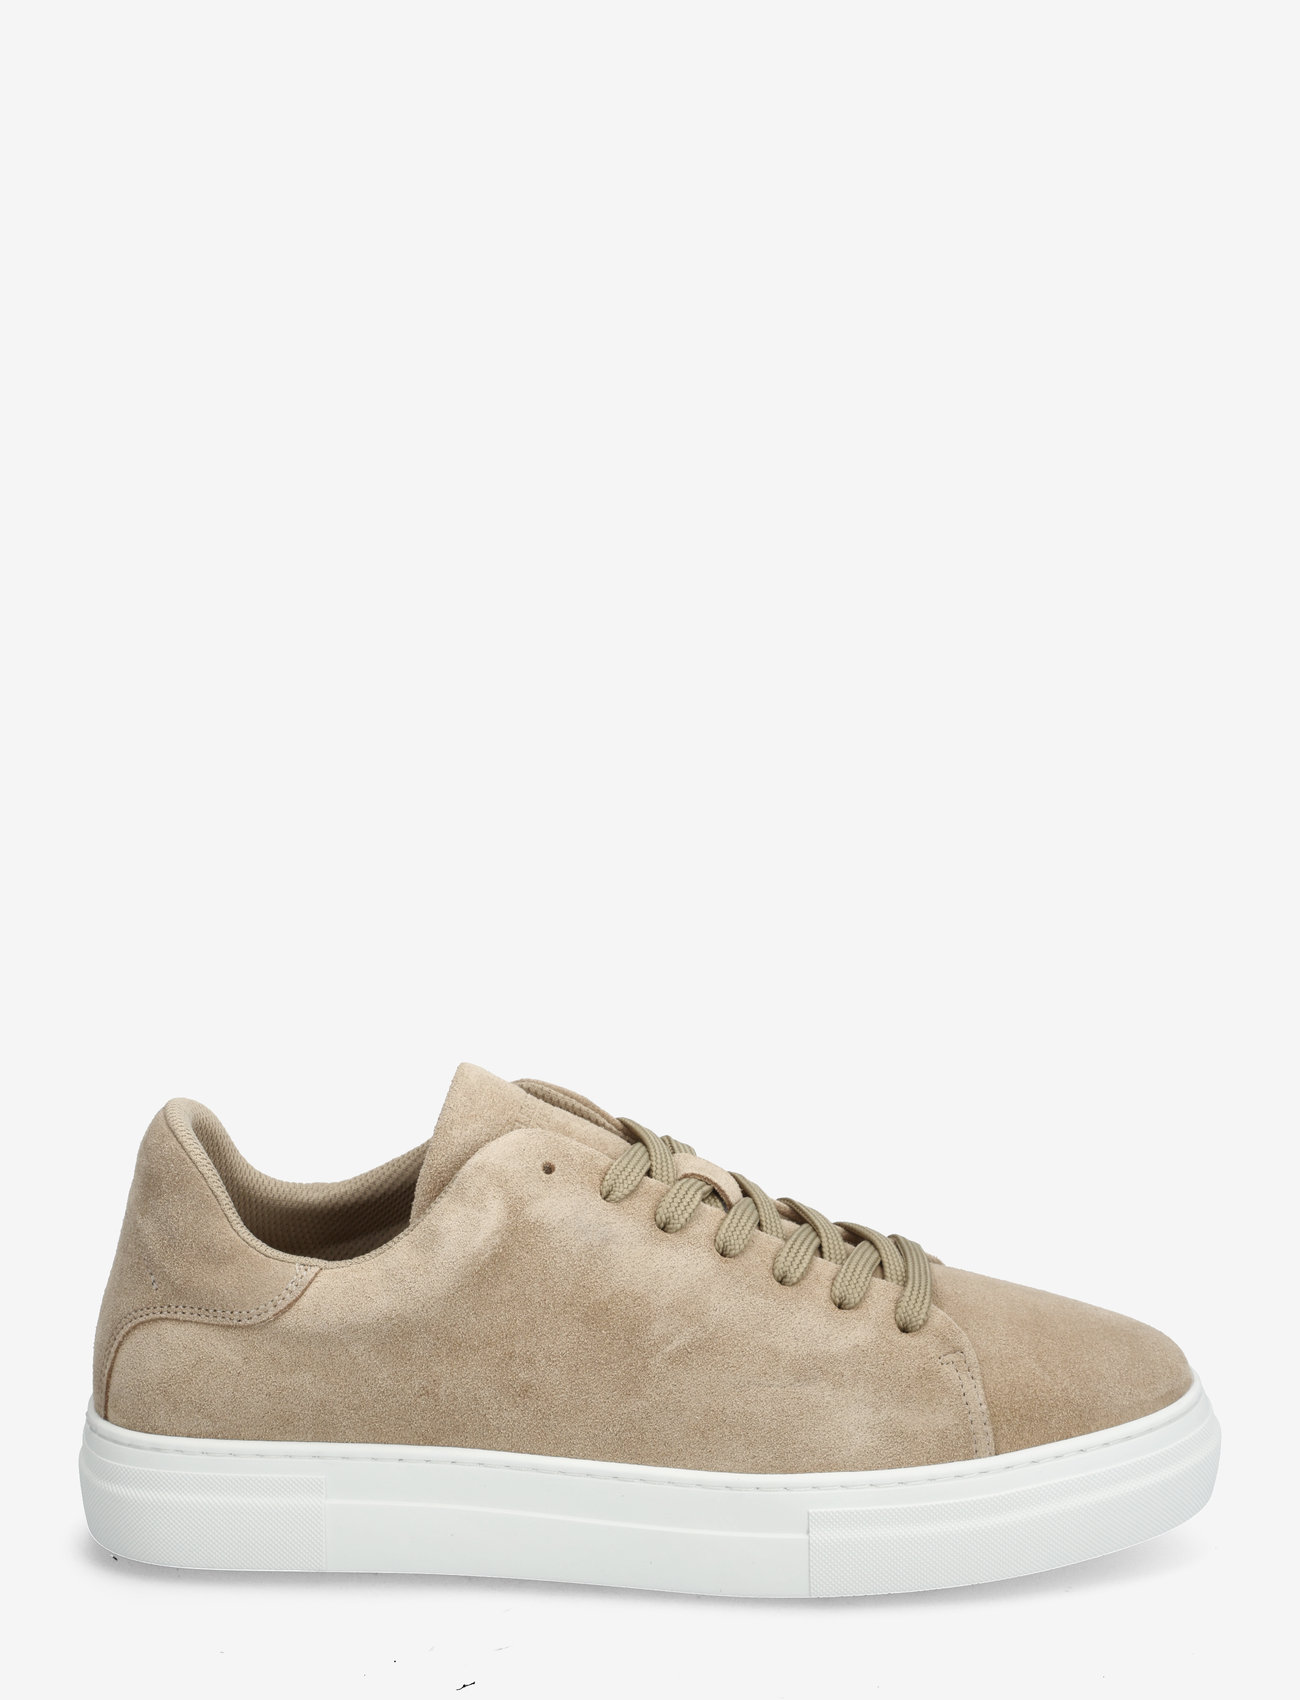 Selected Homme - SLHDAVID CHUNKY CLEAN SUEDE TRAINER B - low tops - sand - 1